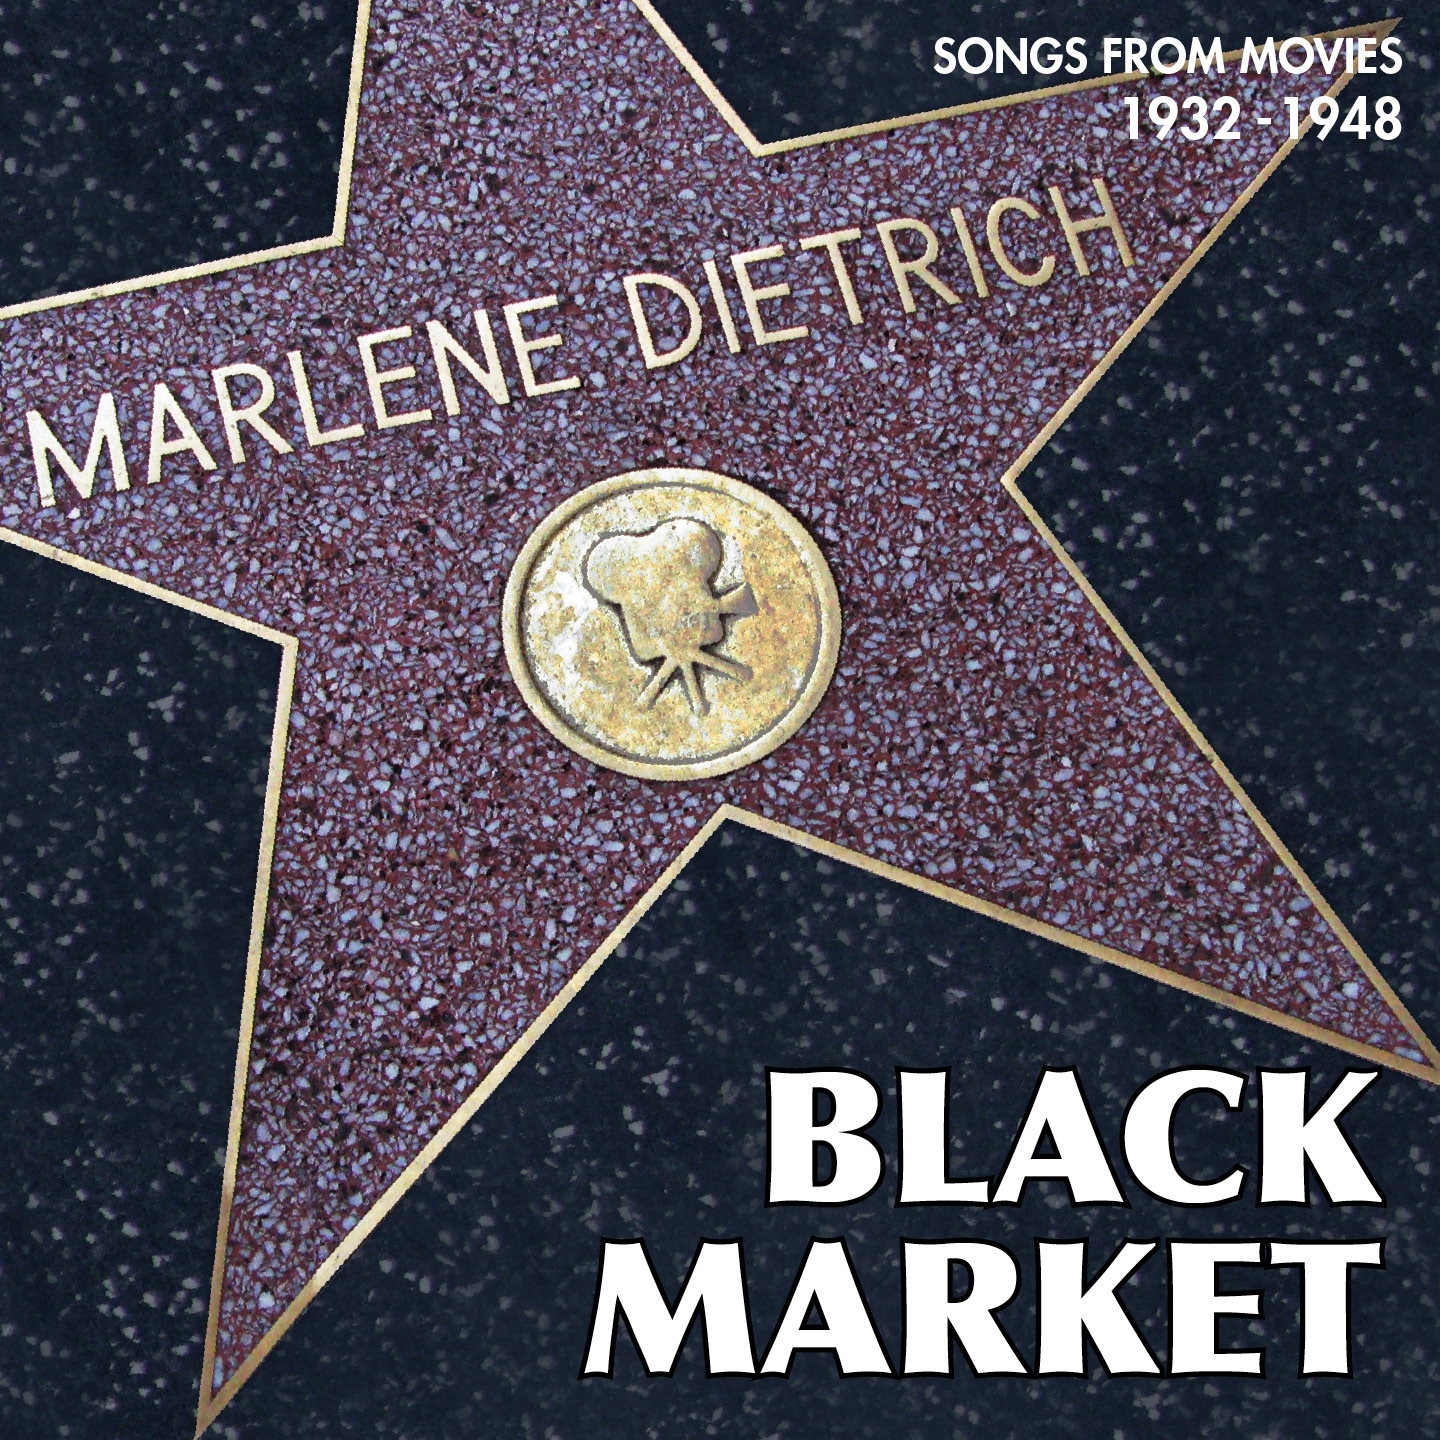 Black Market (Songs from Movies 1932 - 1948)